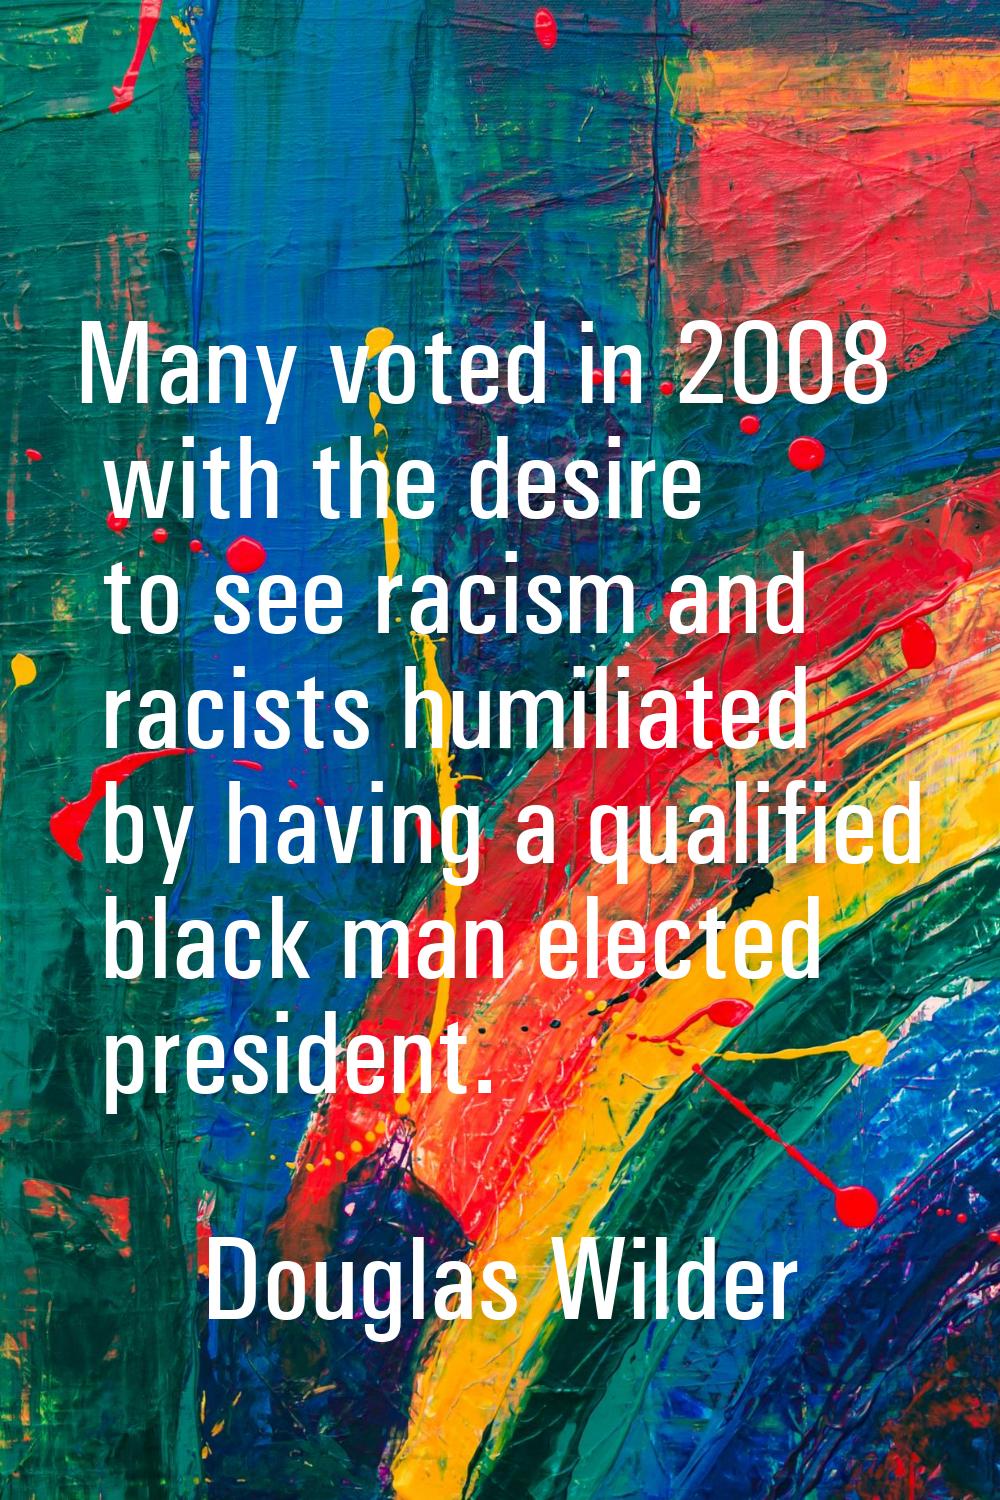 Many voted in 2008 with the desire to see racism and racists humiliated by having a qualified black